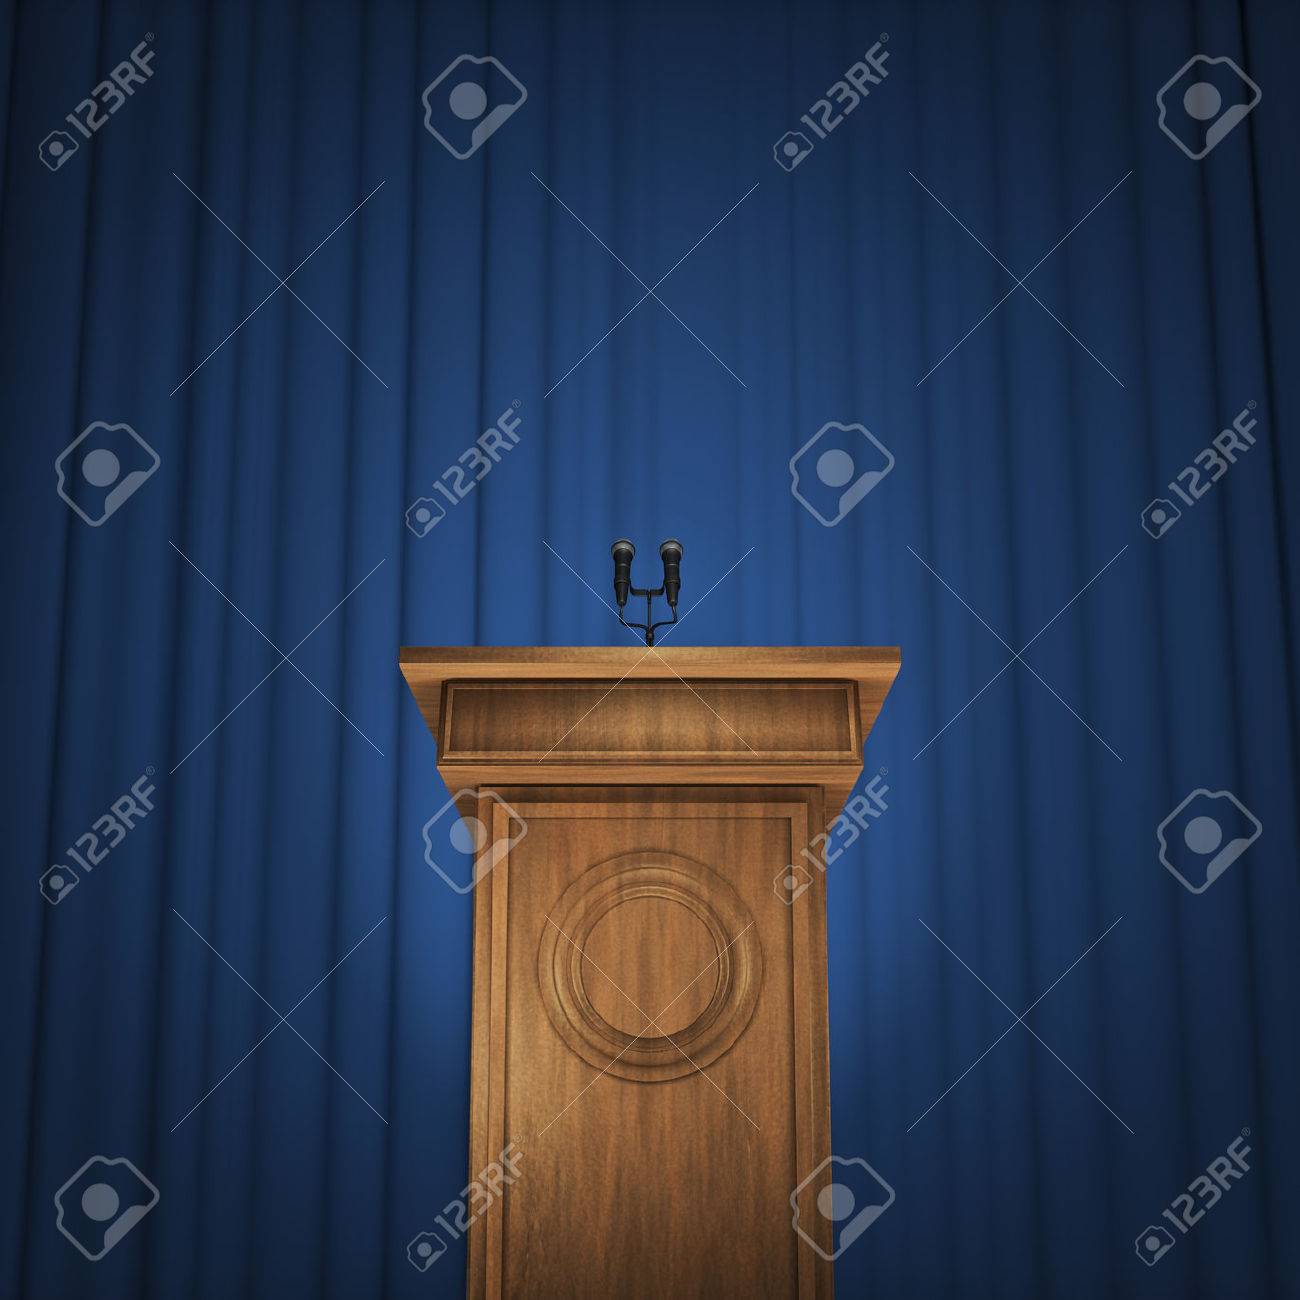 Press Conference 3d Render Of Speaker Podium With Microphones